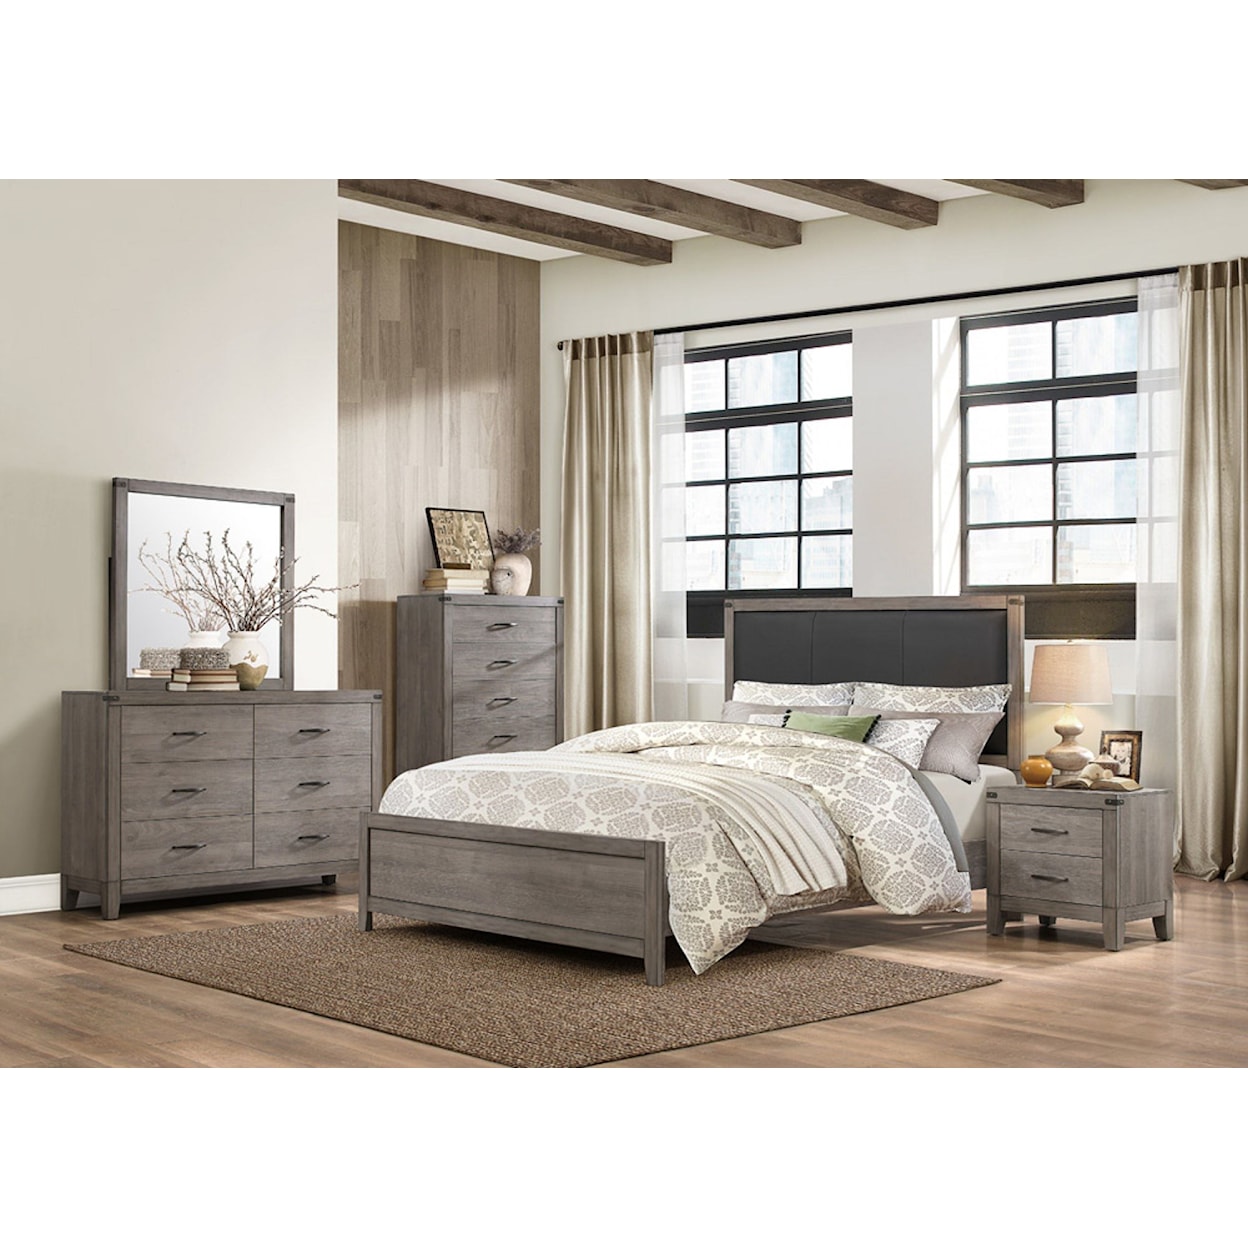 Homelegance Furniture 2042 Contemporary Queen Bedroom Group